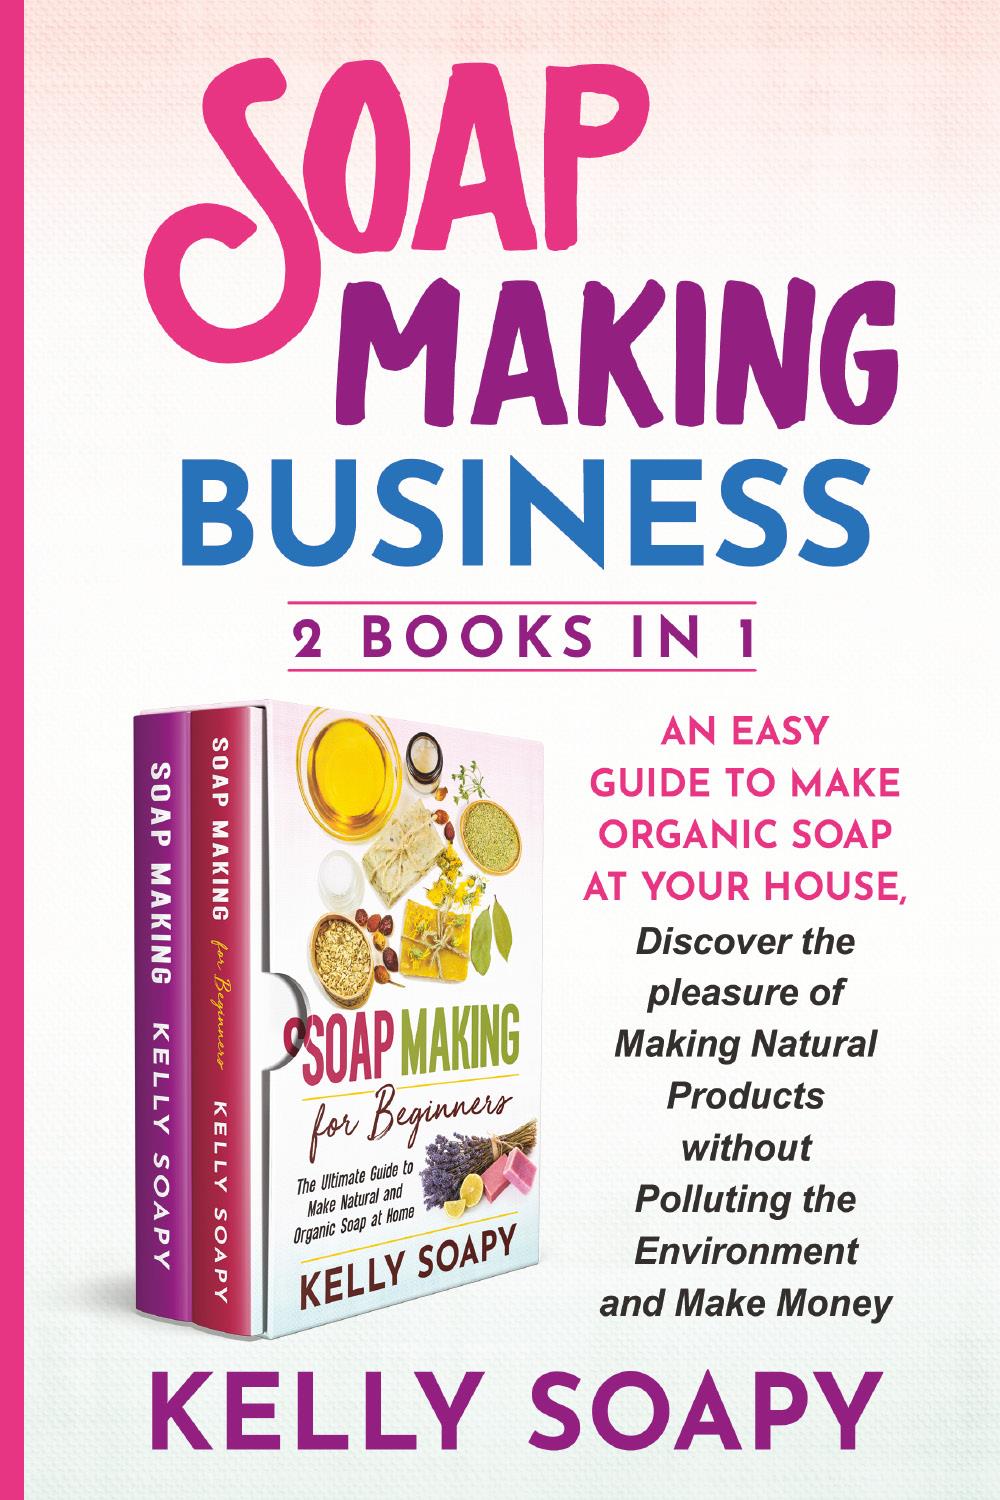 Soap Making Business (2 Books in 1)